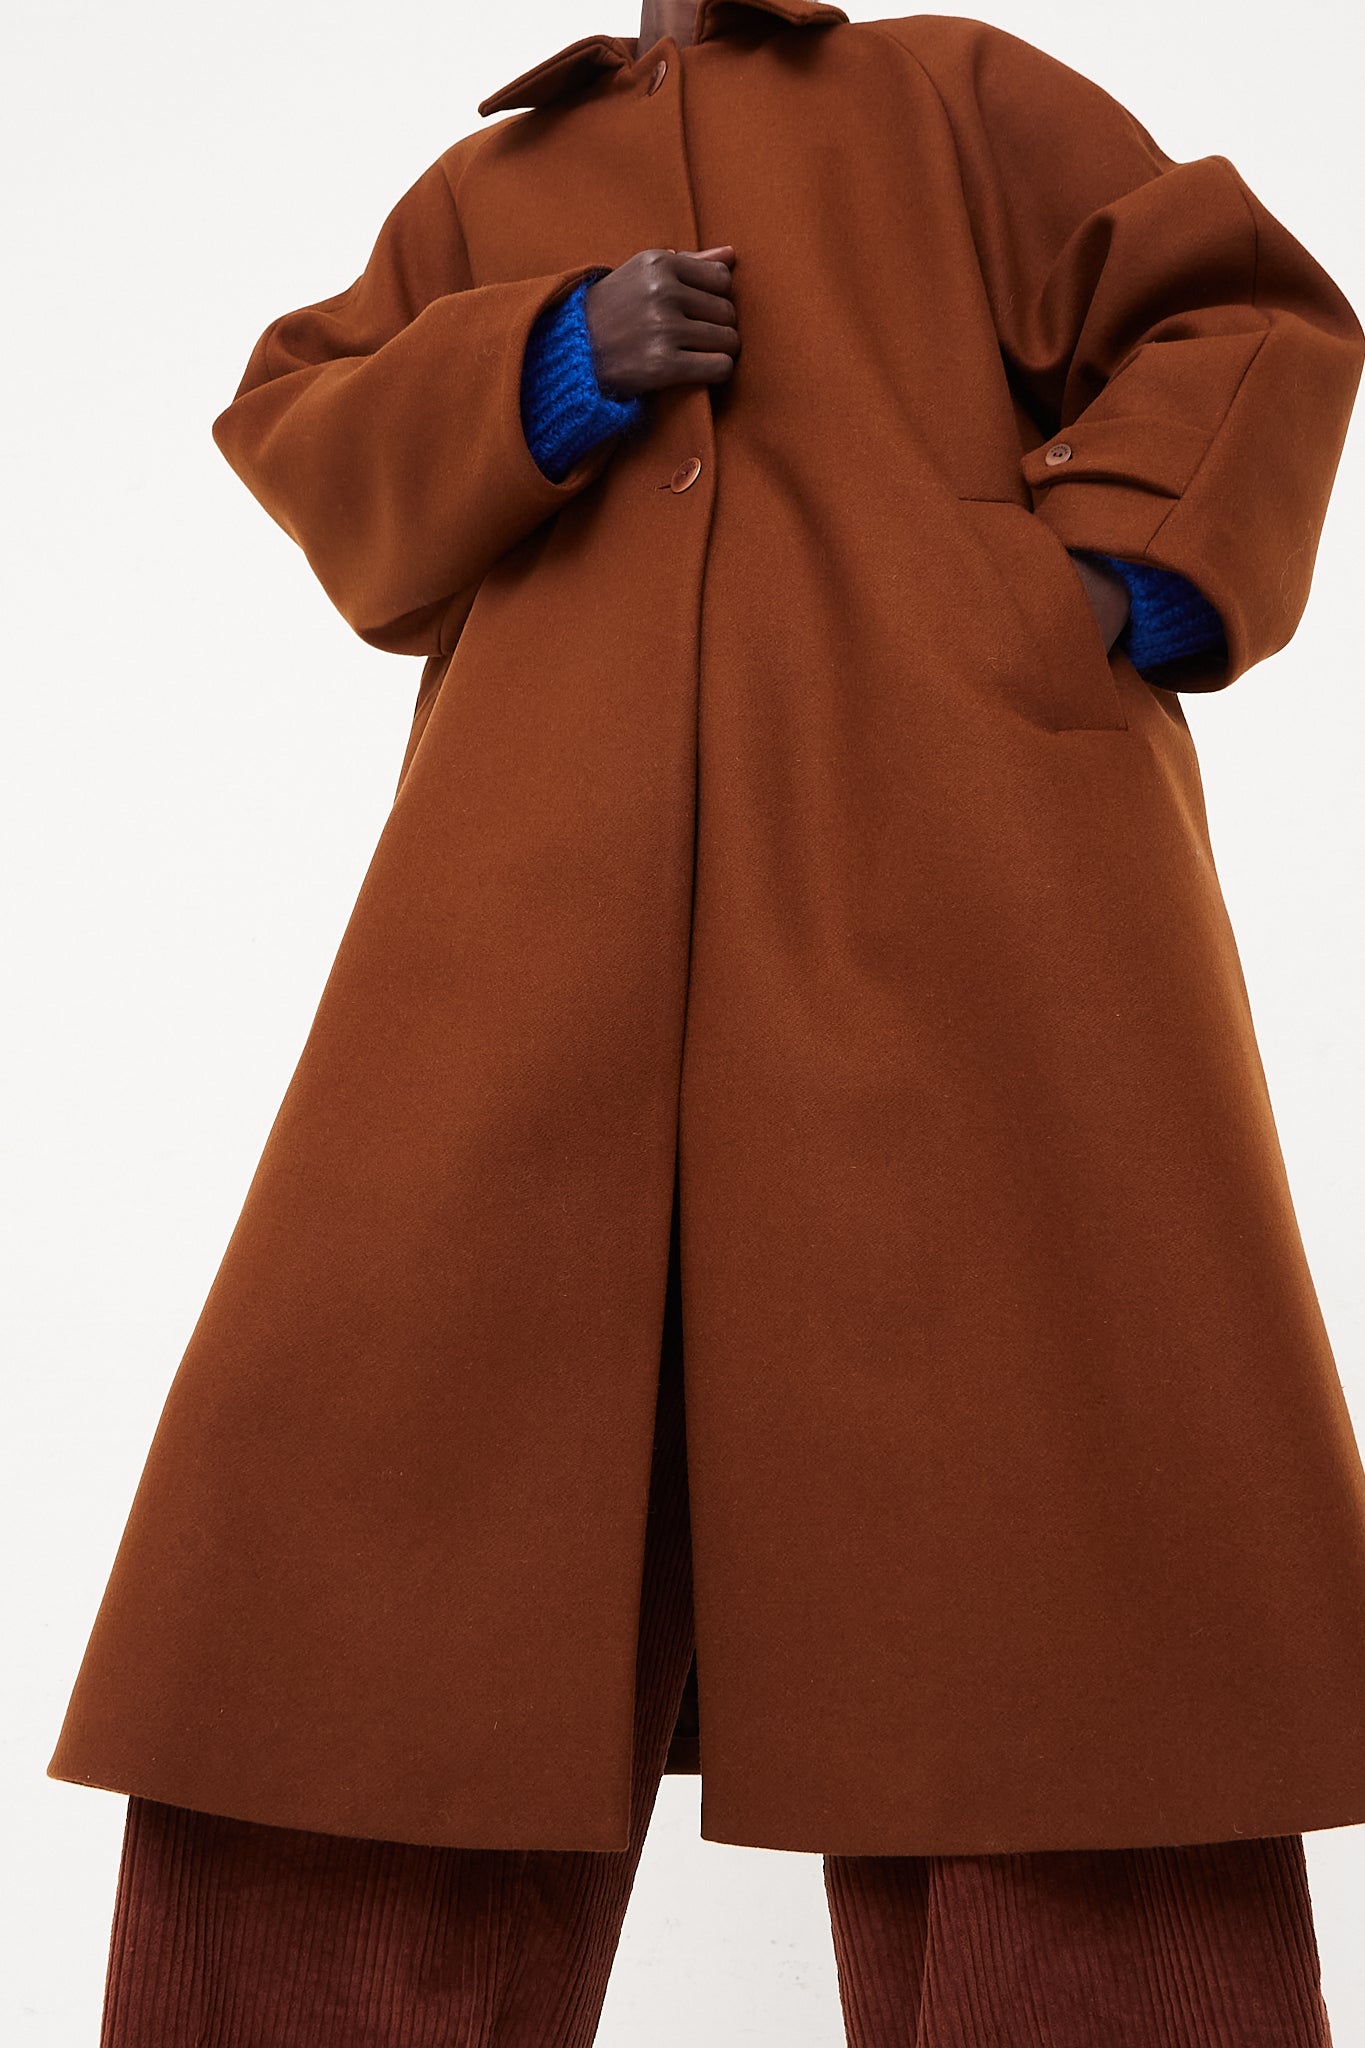 CORDERA Wool Coat Camel | Oroboro Store | Front image of coat upclose buttoned closed on model